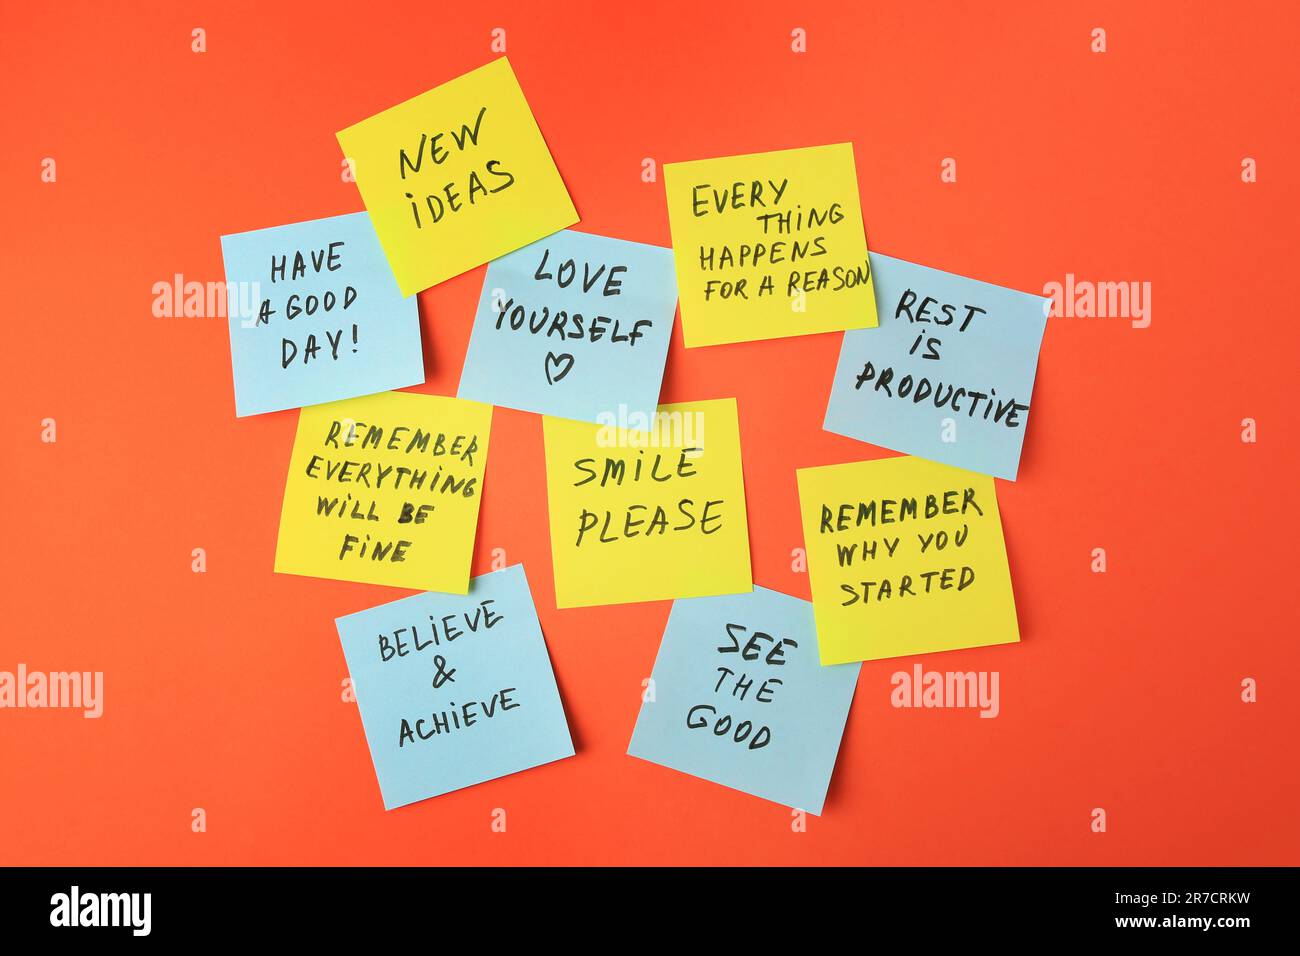 Paper notes with life-affirming phrases on orange background Stock Photo